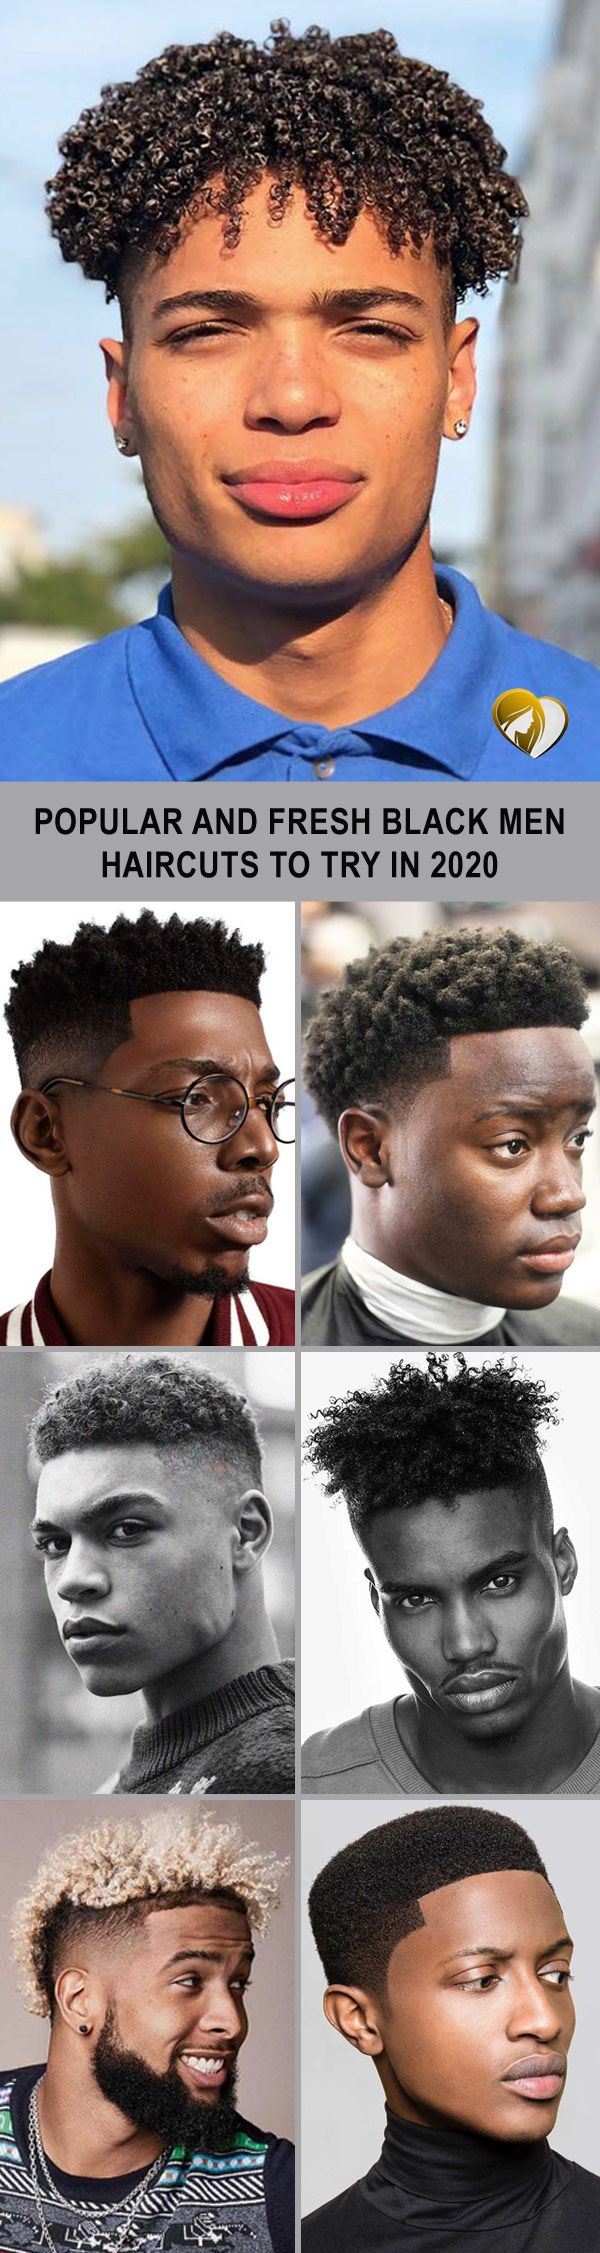 Popular And Fresh Black Men Haircuts To Try In 2020